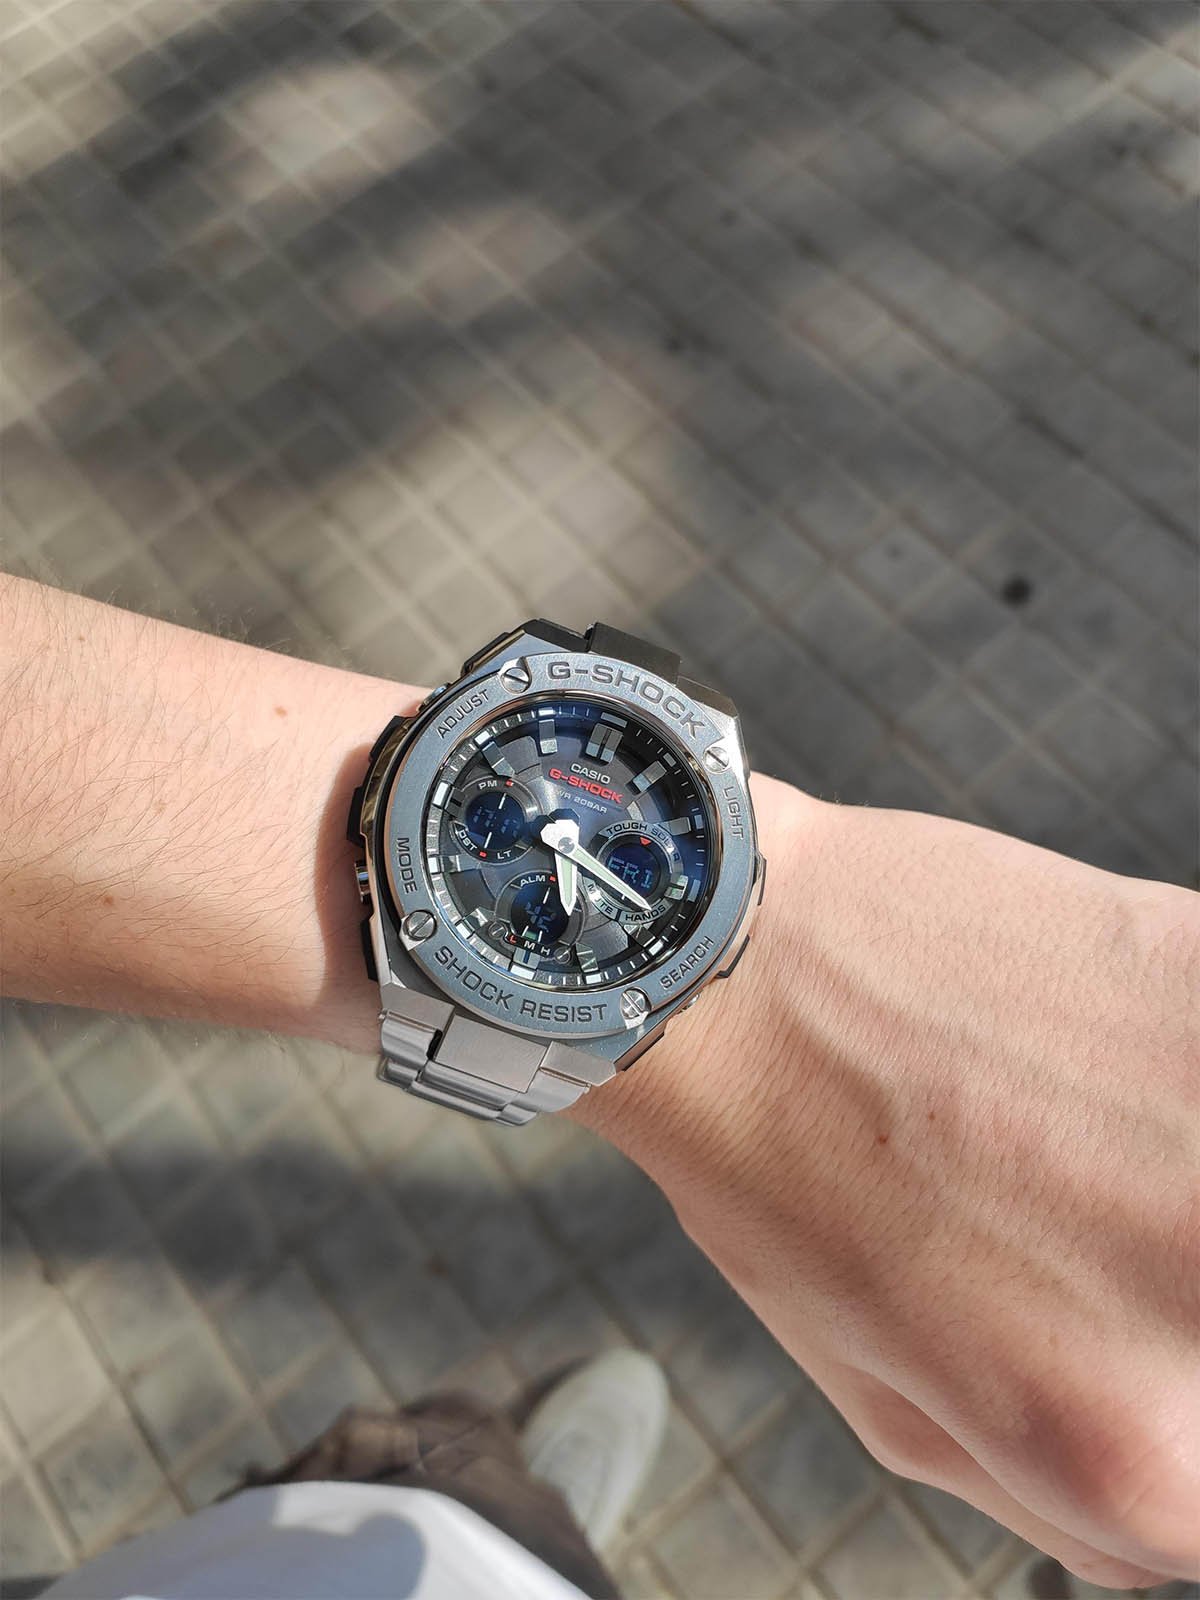 Casio G-Shock G-Steel GST-S110D-1ADR Tough Solar Digital Analog Dial Stainless Steel Band.